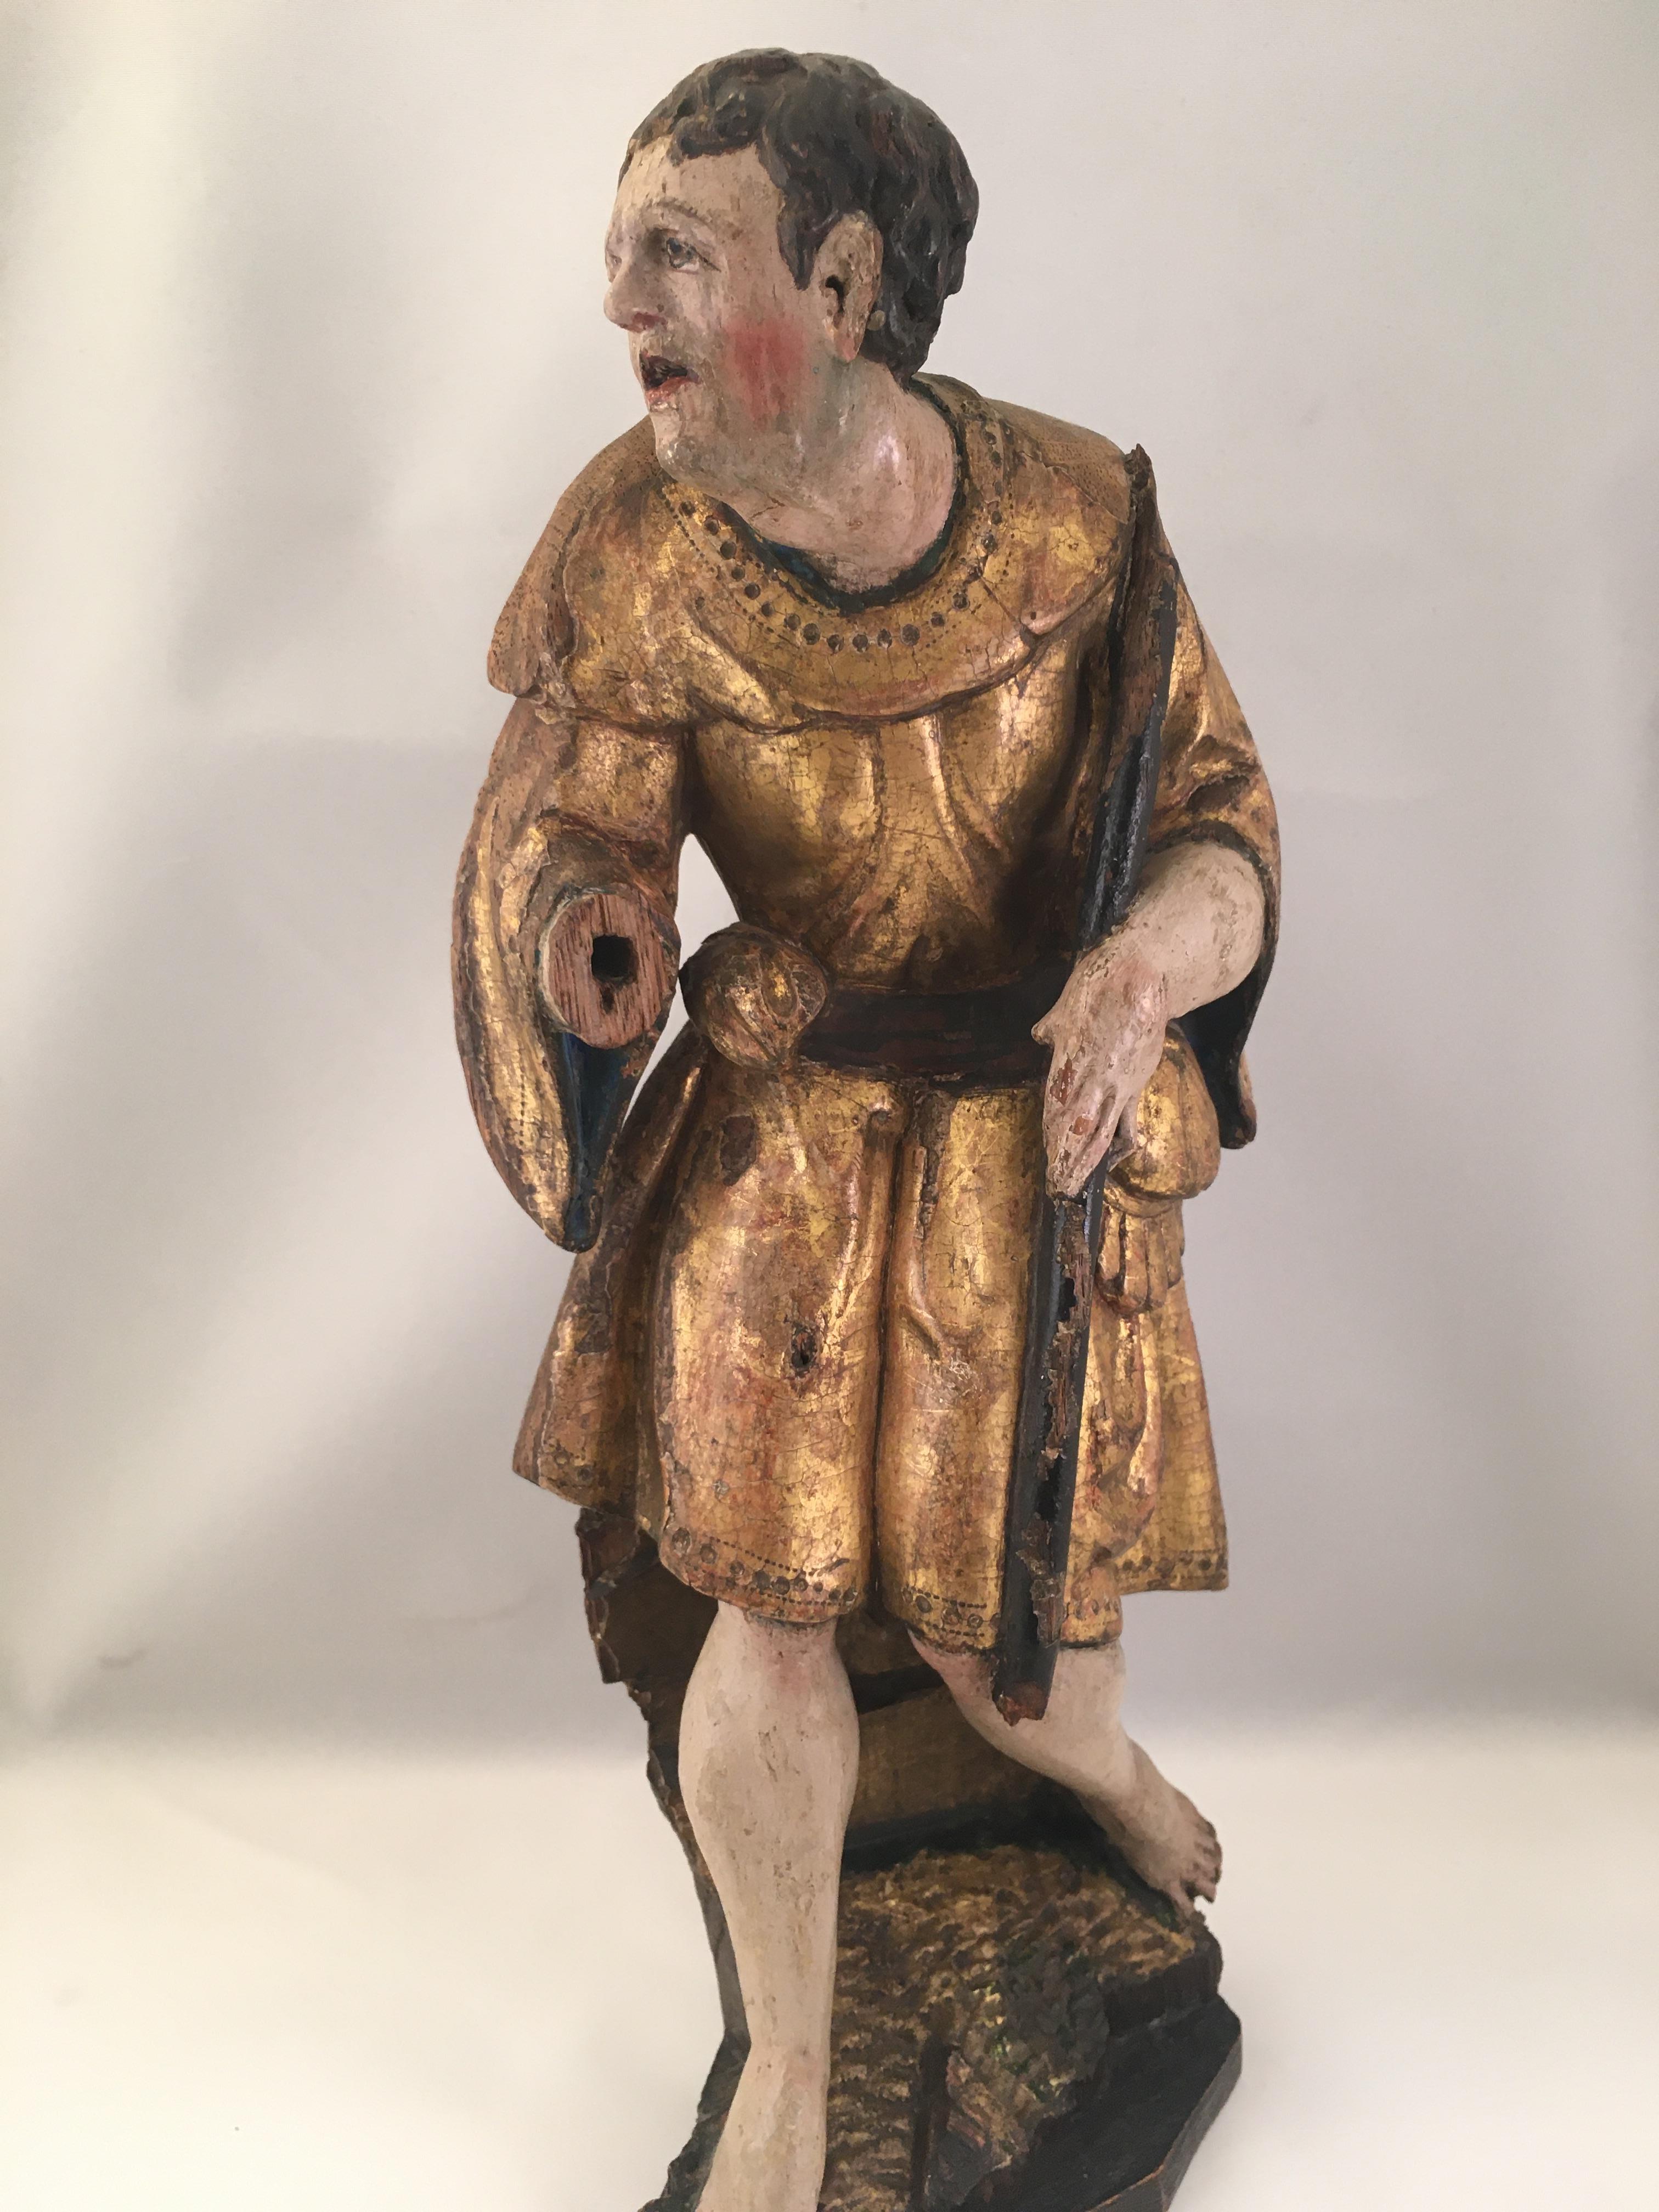 Polychromed Medieval Sculpture of a Shepherd, Part of a 16th Century Retable Piece For Sale